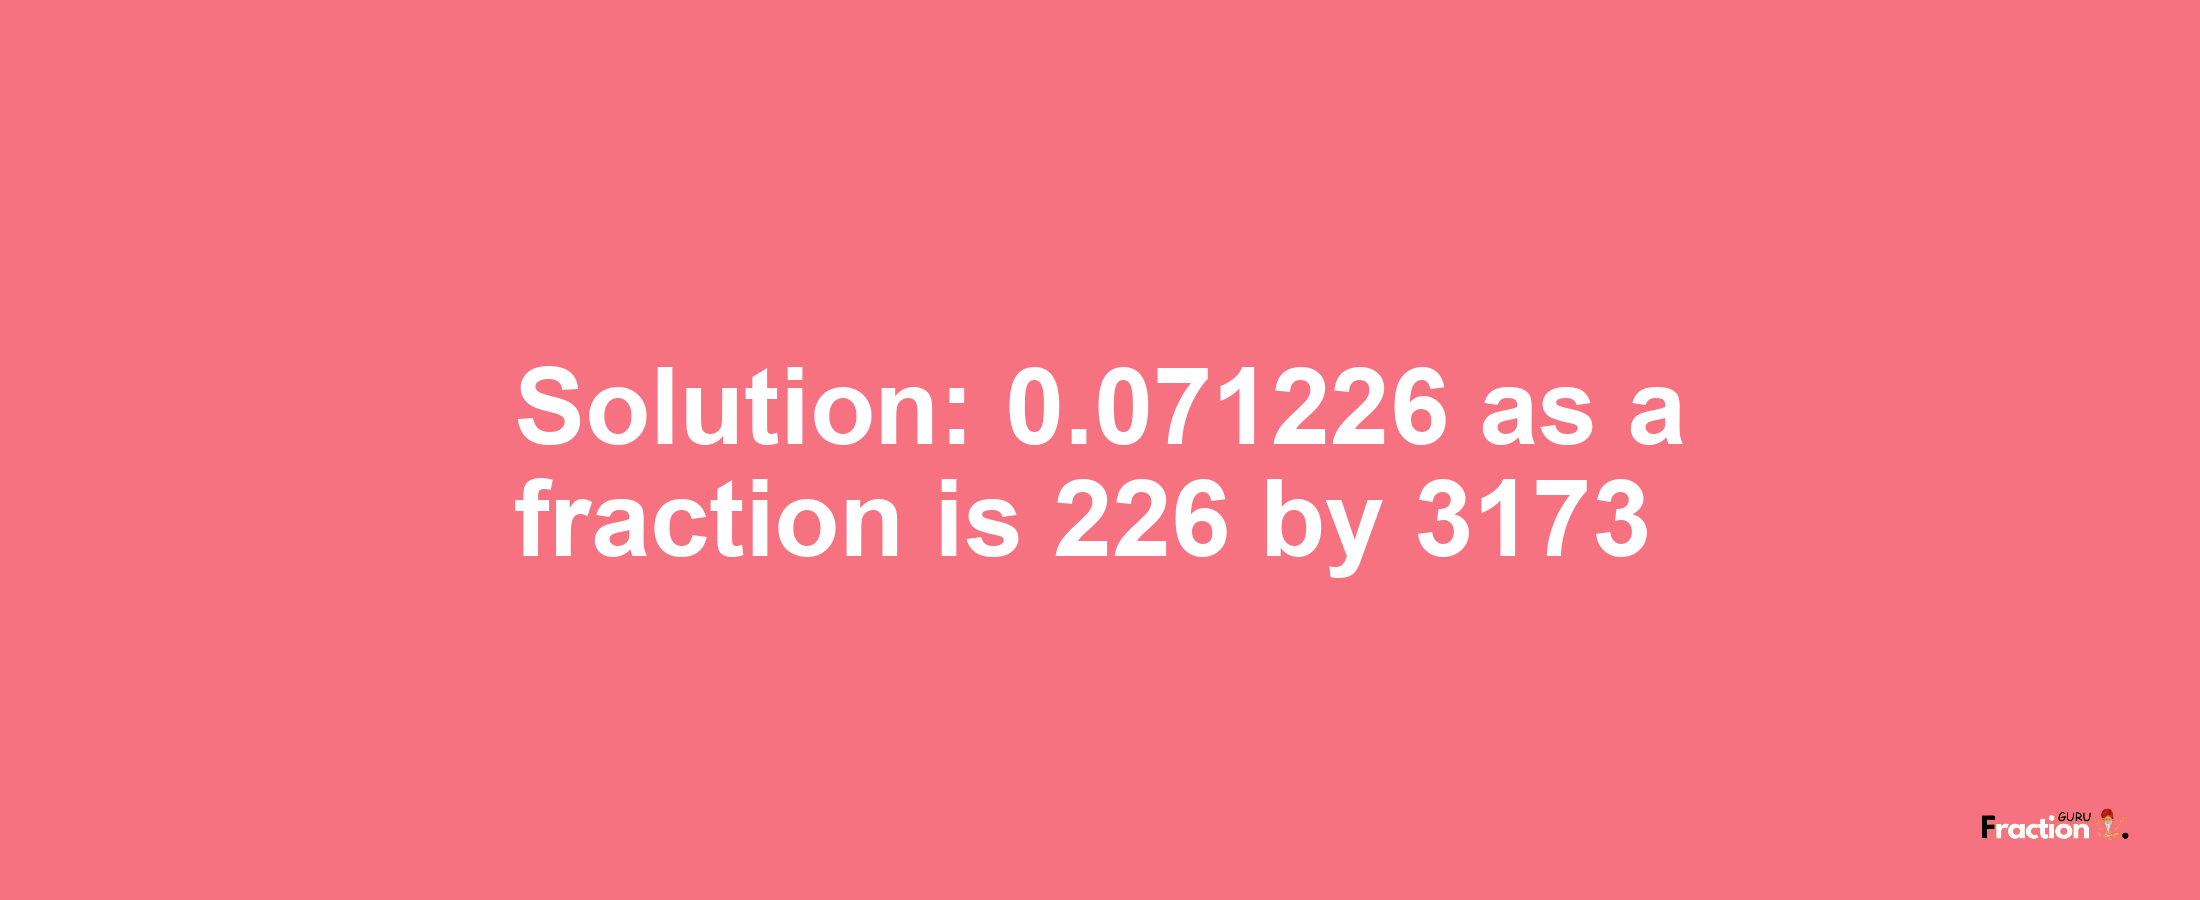 Solution:0.071226 as a fraction is 226/3173